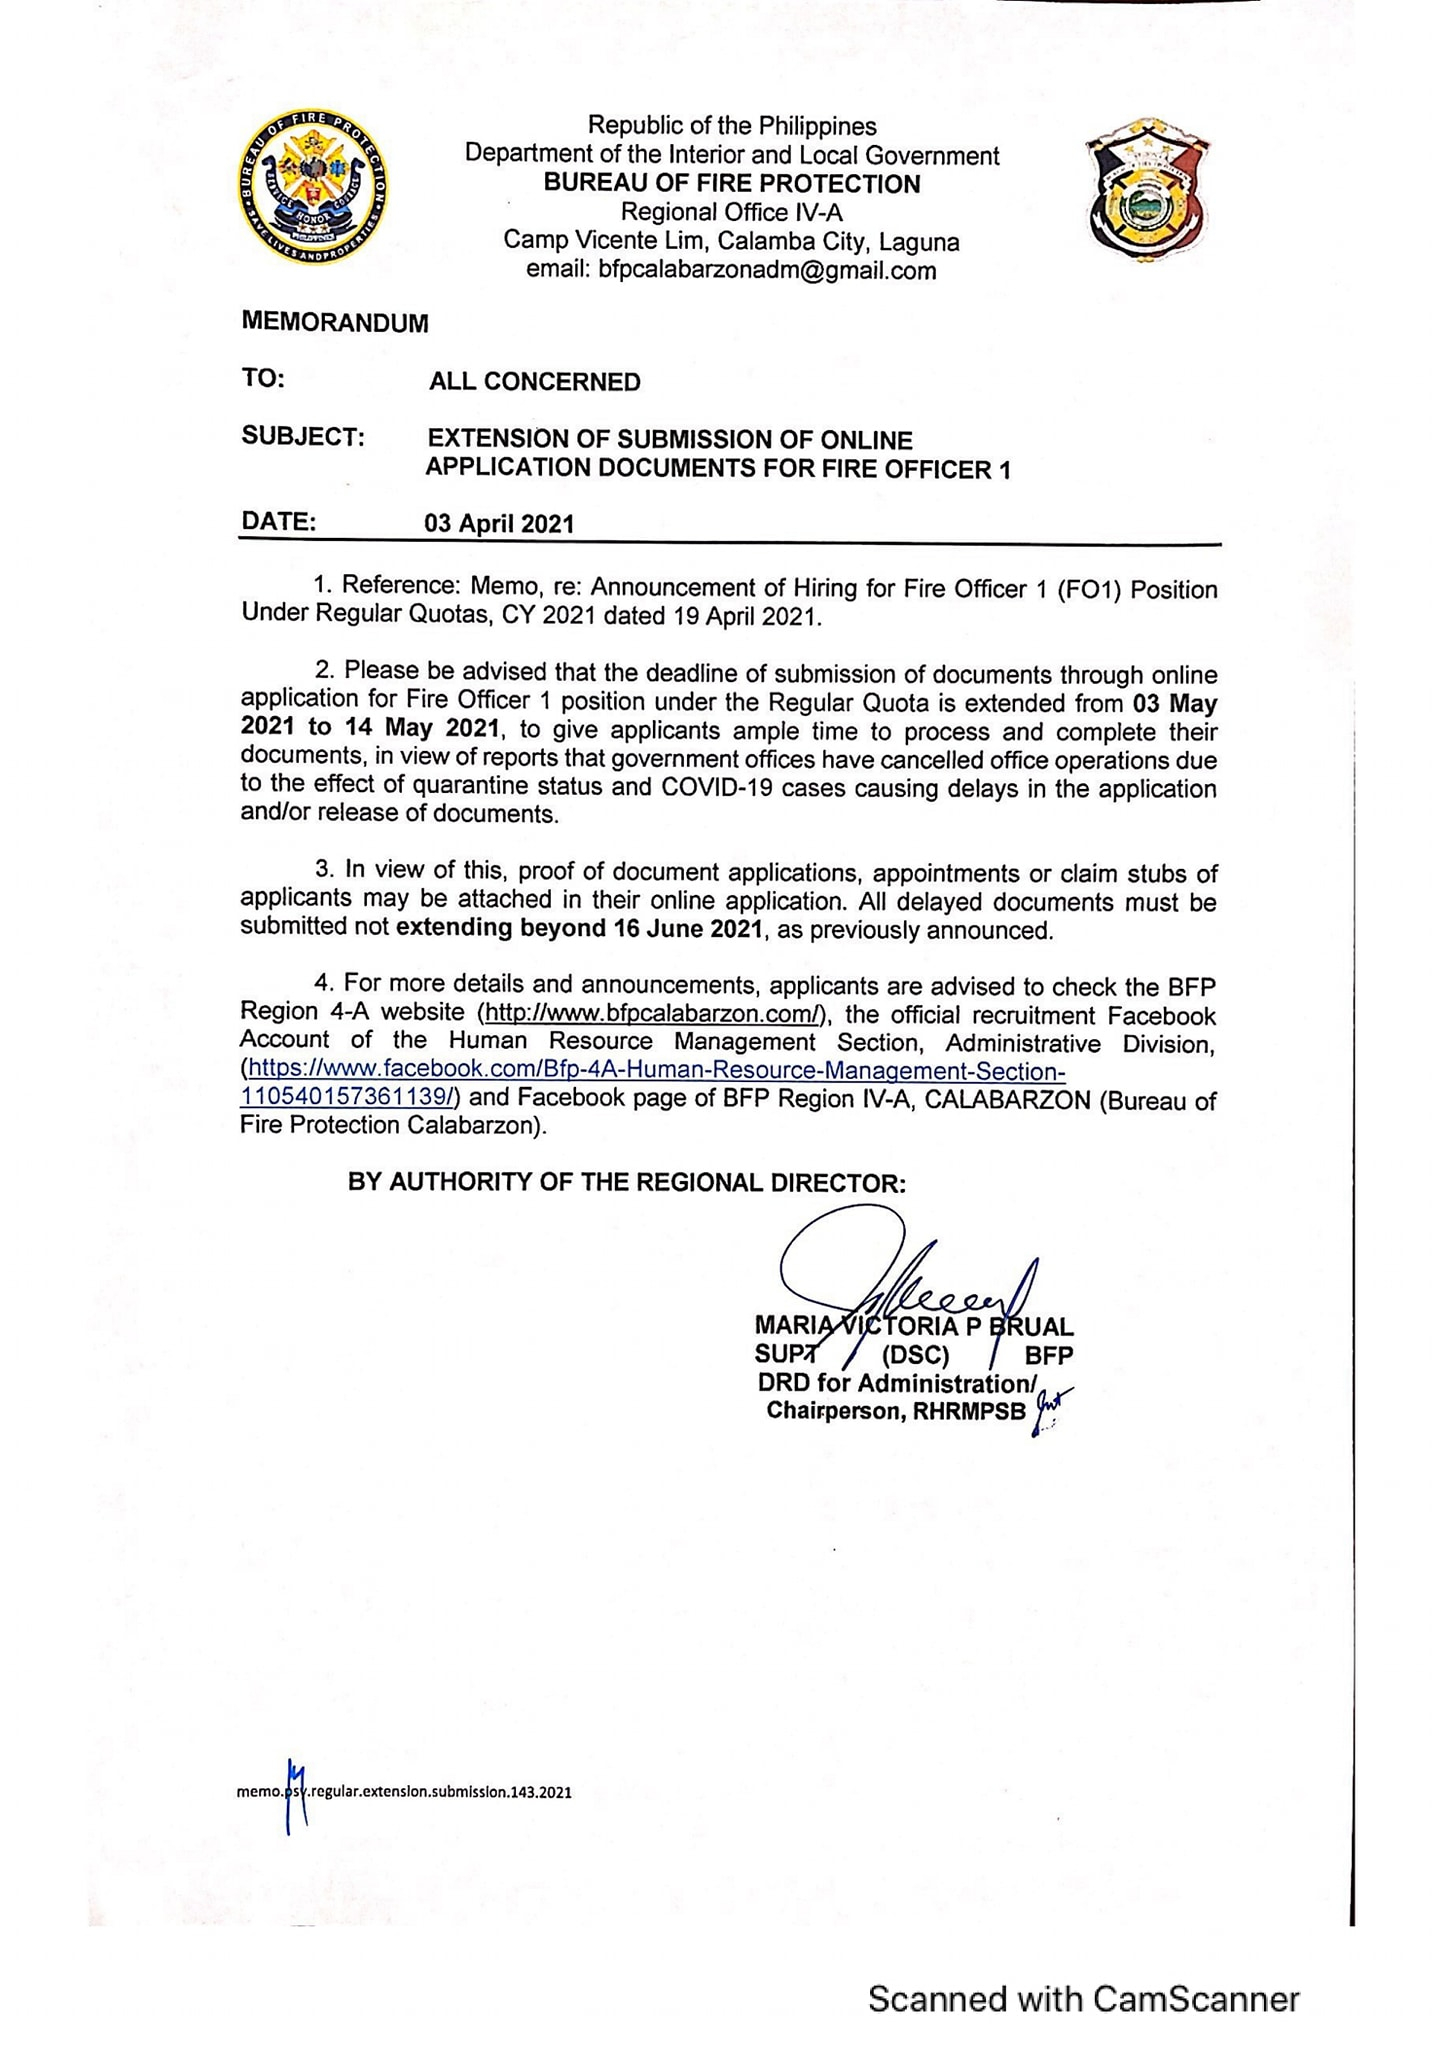 Civil Service Exam PH BFP CALABARZON Hiring And Selection For Fire